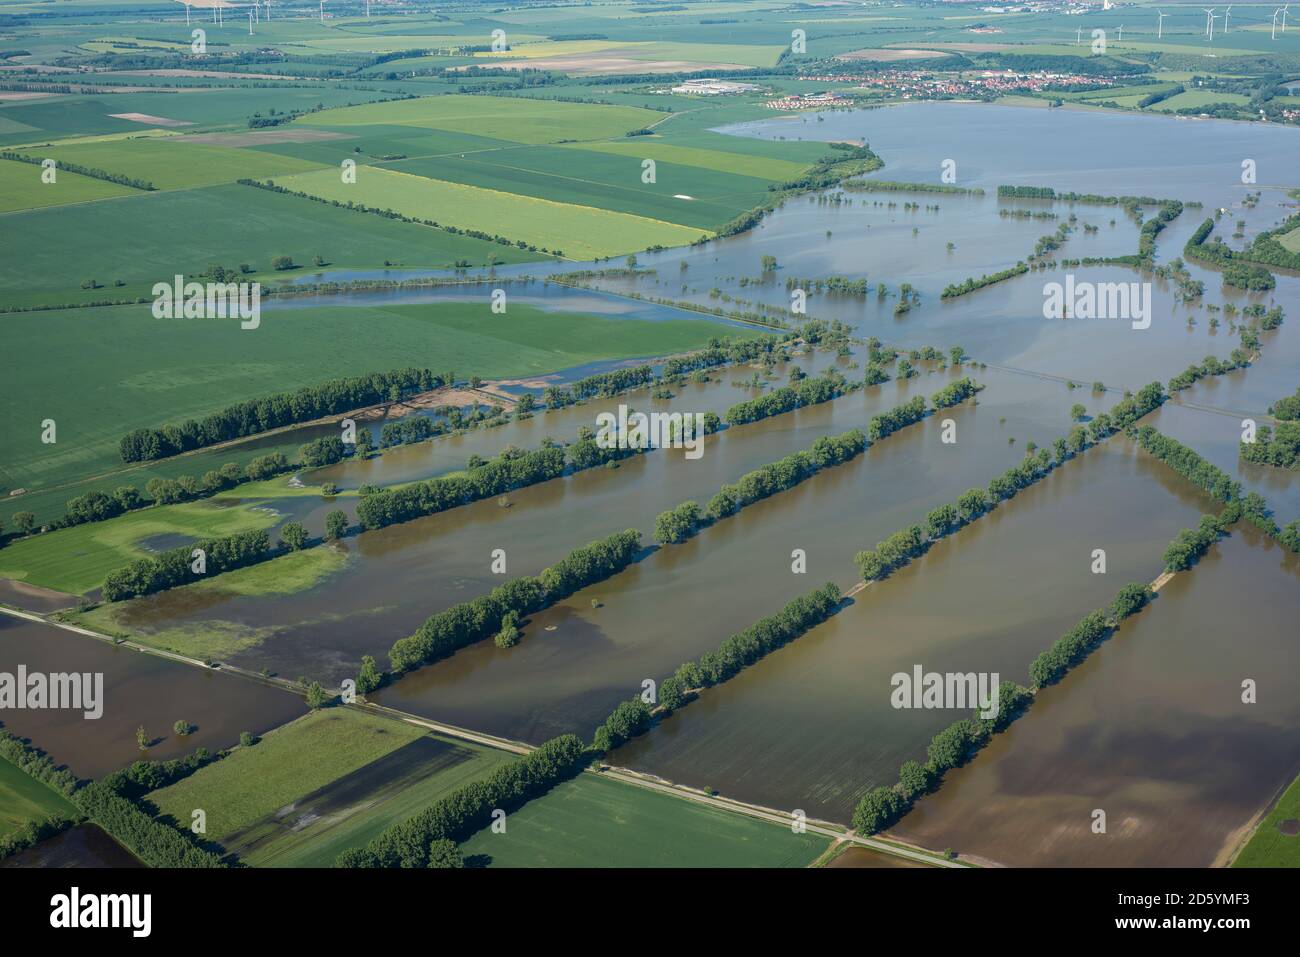 Germany, Straussfurt, aerial view of flooded Unstrut River and detention basin Stock Photo